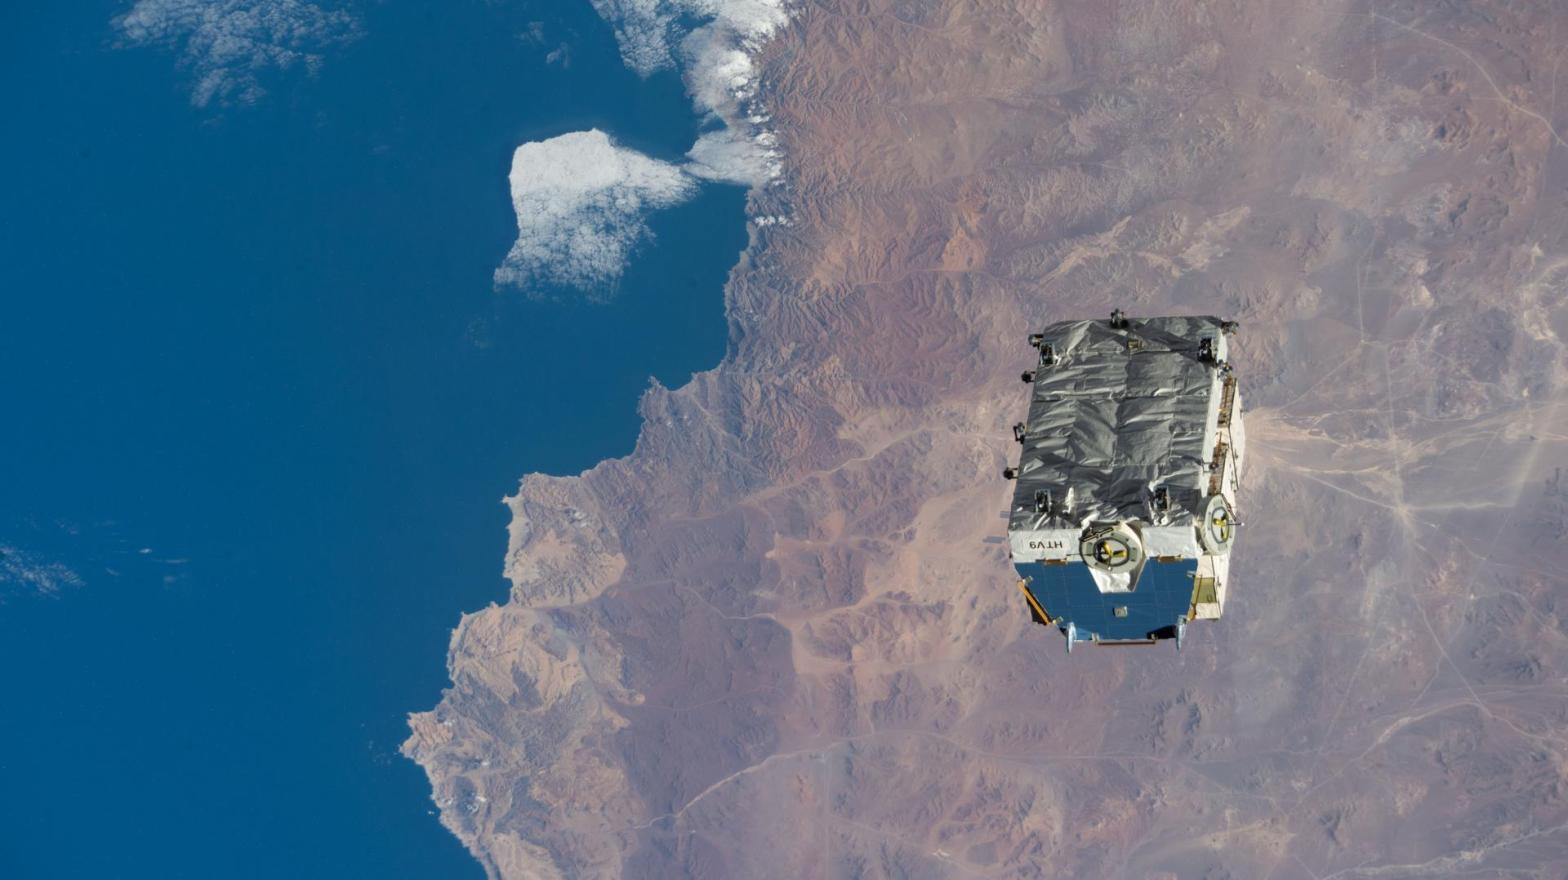 The external pallet packed with old nickel-hydrogen batteries, photographed shortly after being released by the Canadarm2 robotic arm. The object was orbiting 265 miles (427 km) above Chile when this photo was taken from the ISS.  (Image: NASA)